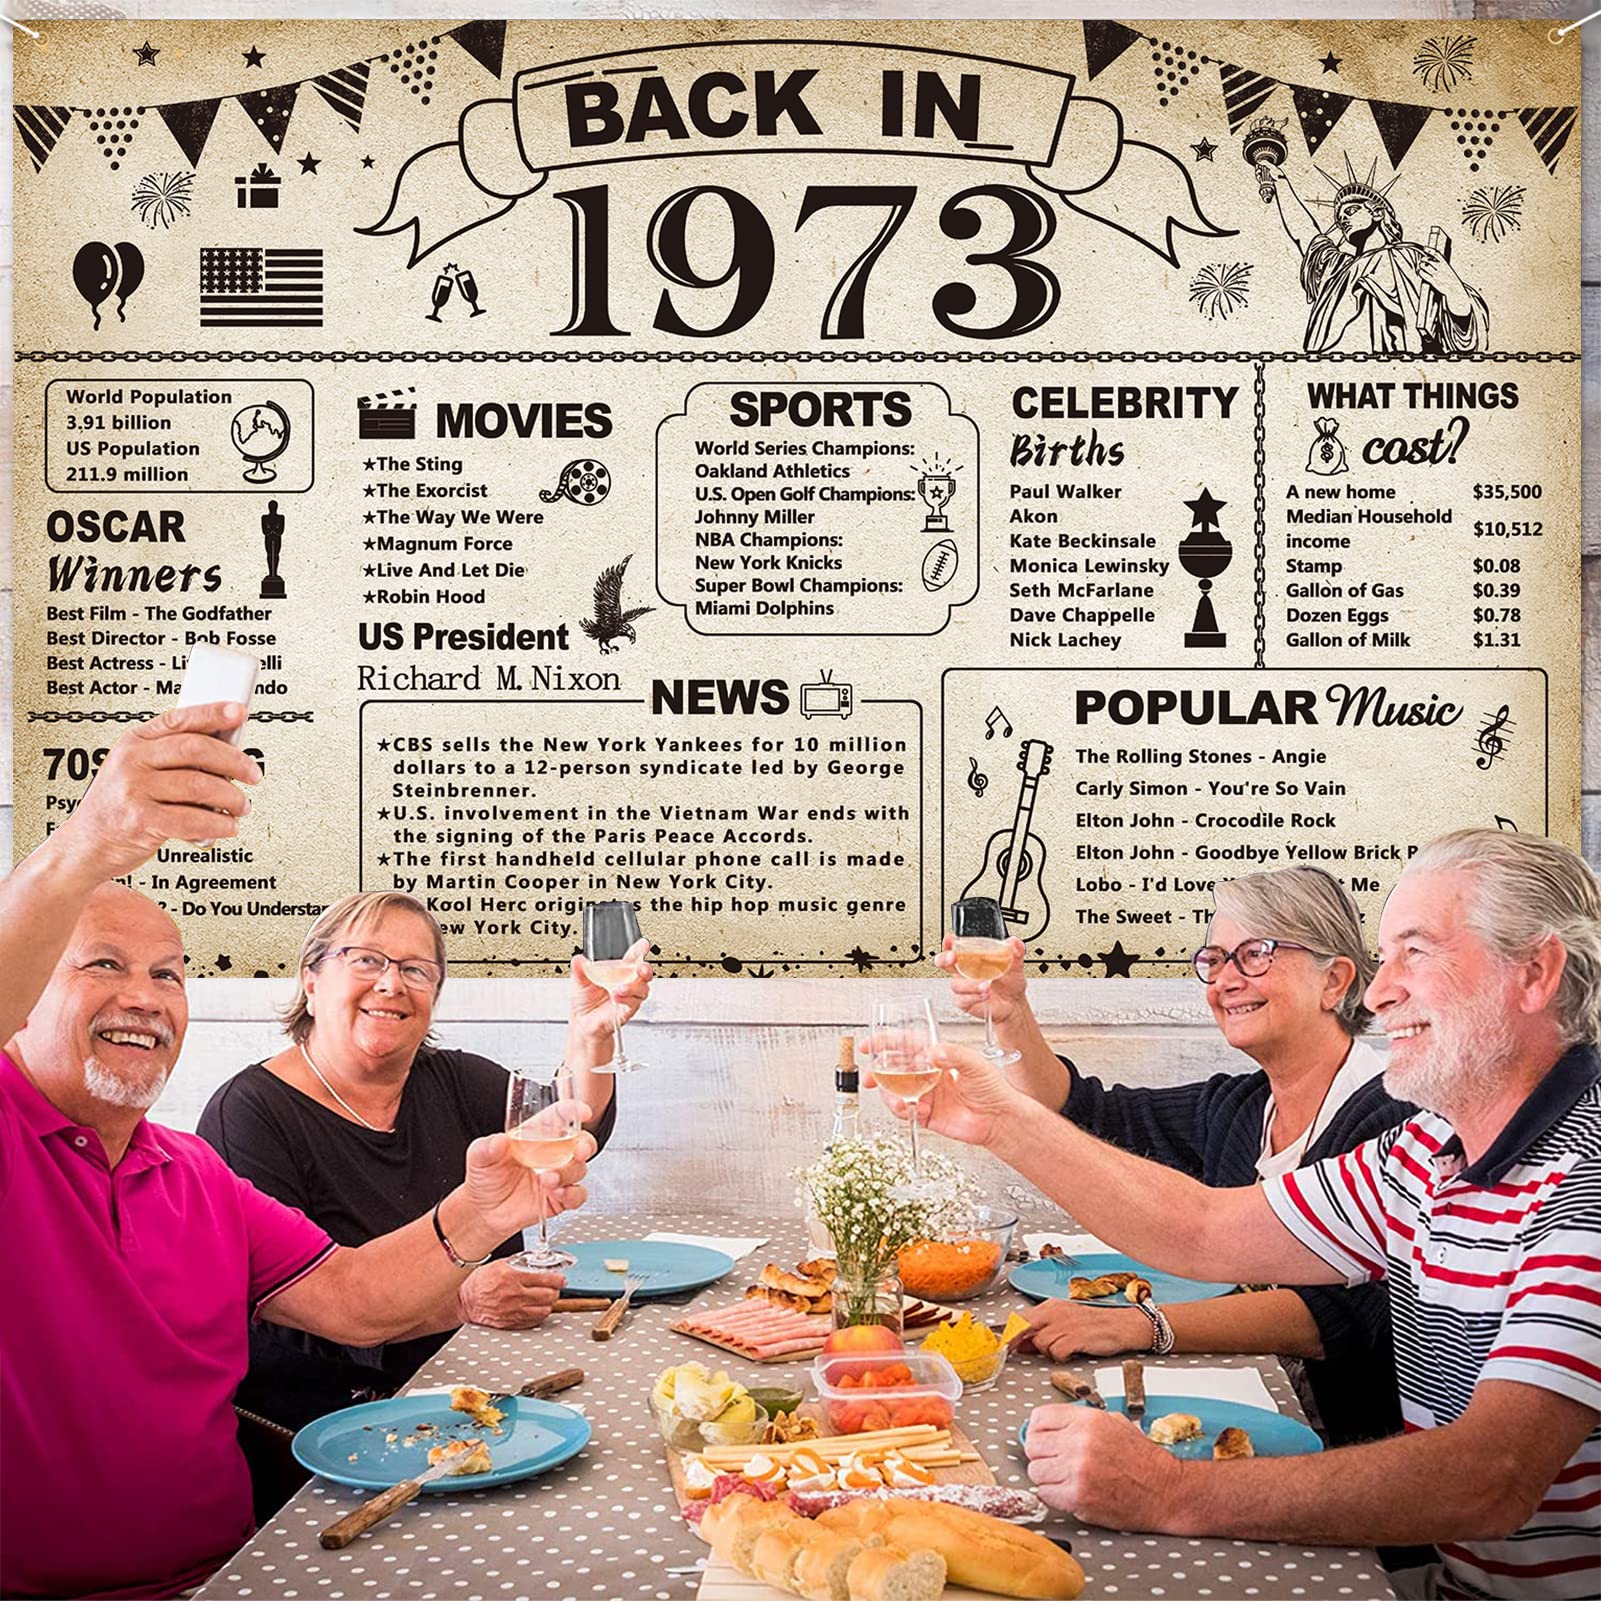 DARUNAXY 51st Birthday Party Decorations, Vintage Back in 1973 Banner 51 Year Old Birthday Party Poster Supplies Vintage 1973 Backdrop Photography Background for Men & Women 51st Class Reunion Decor